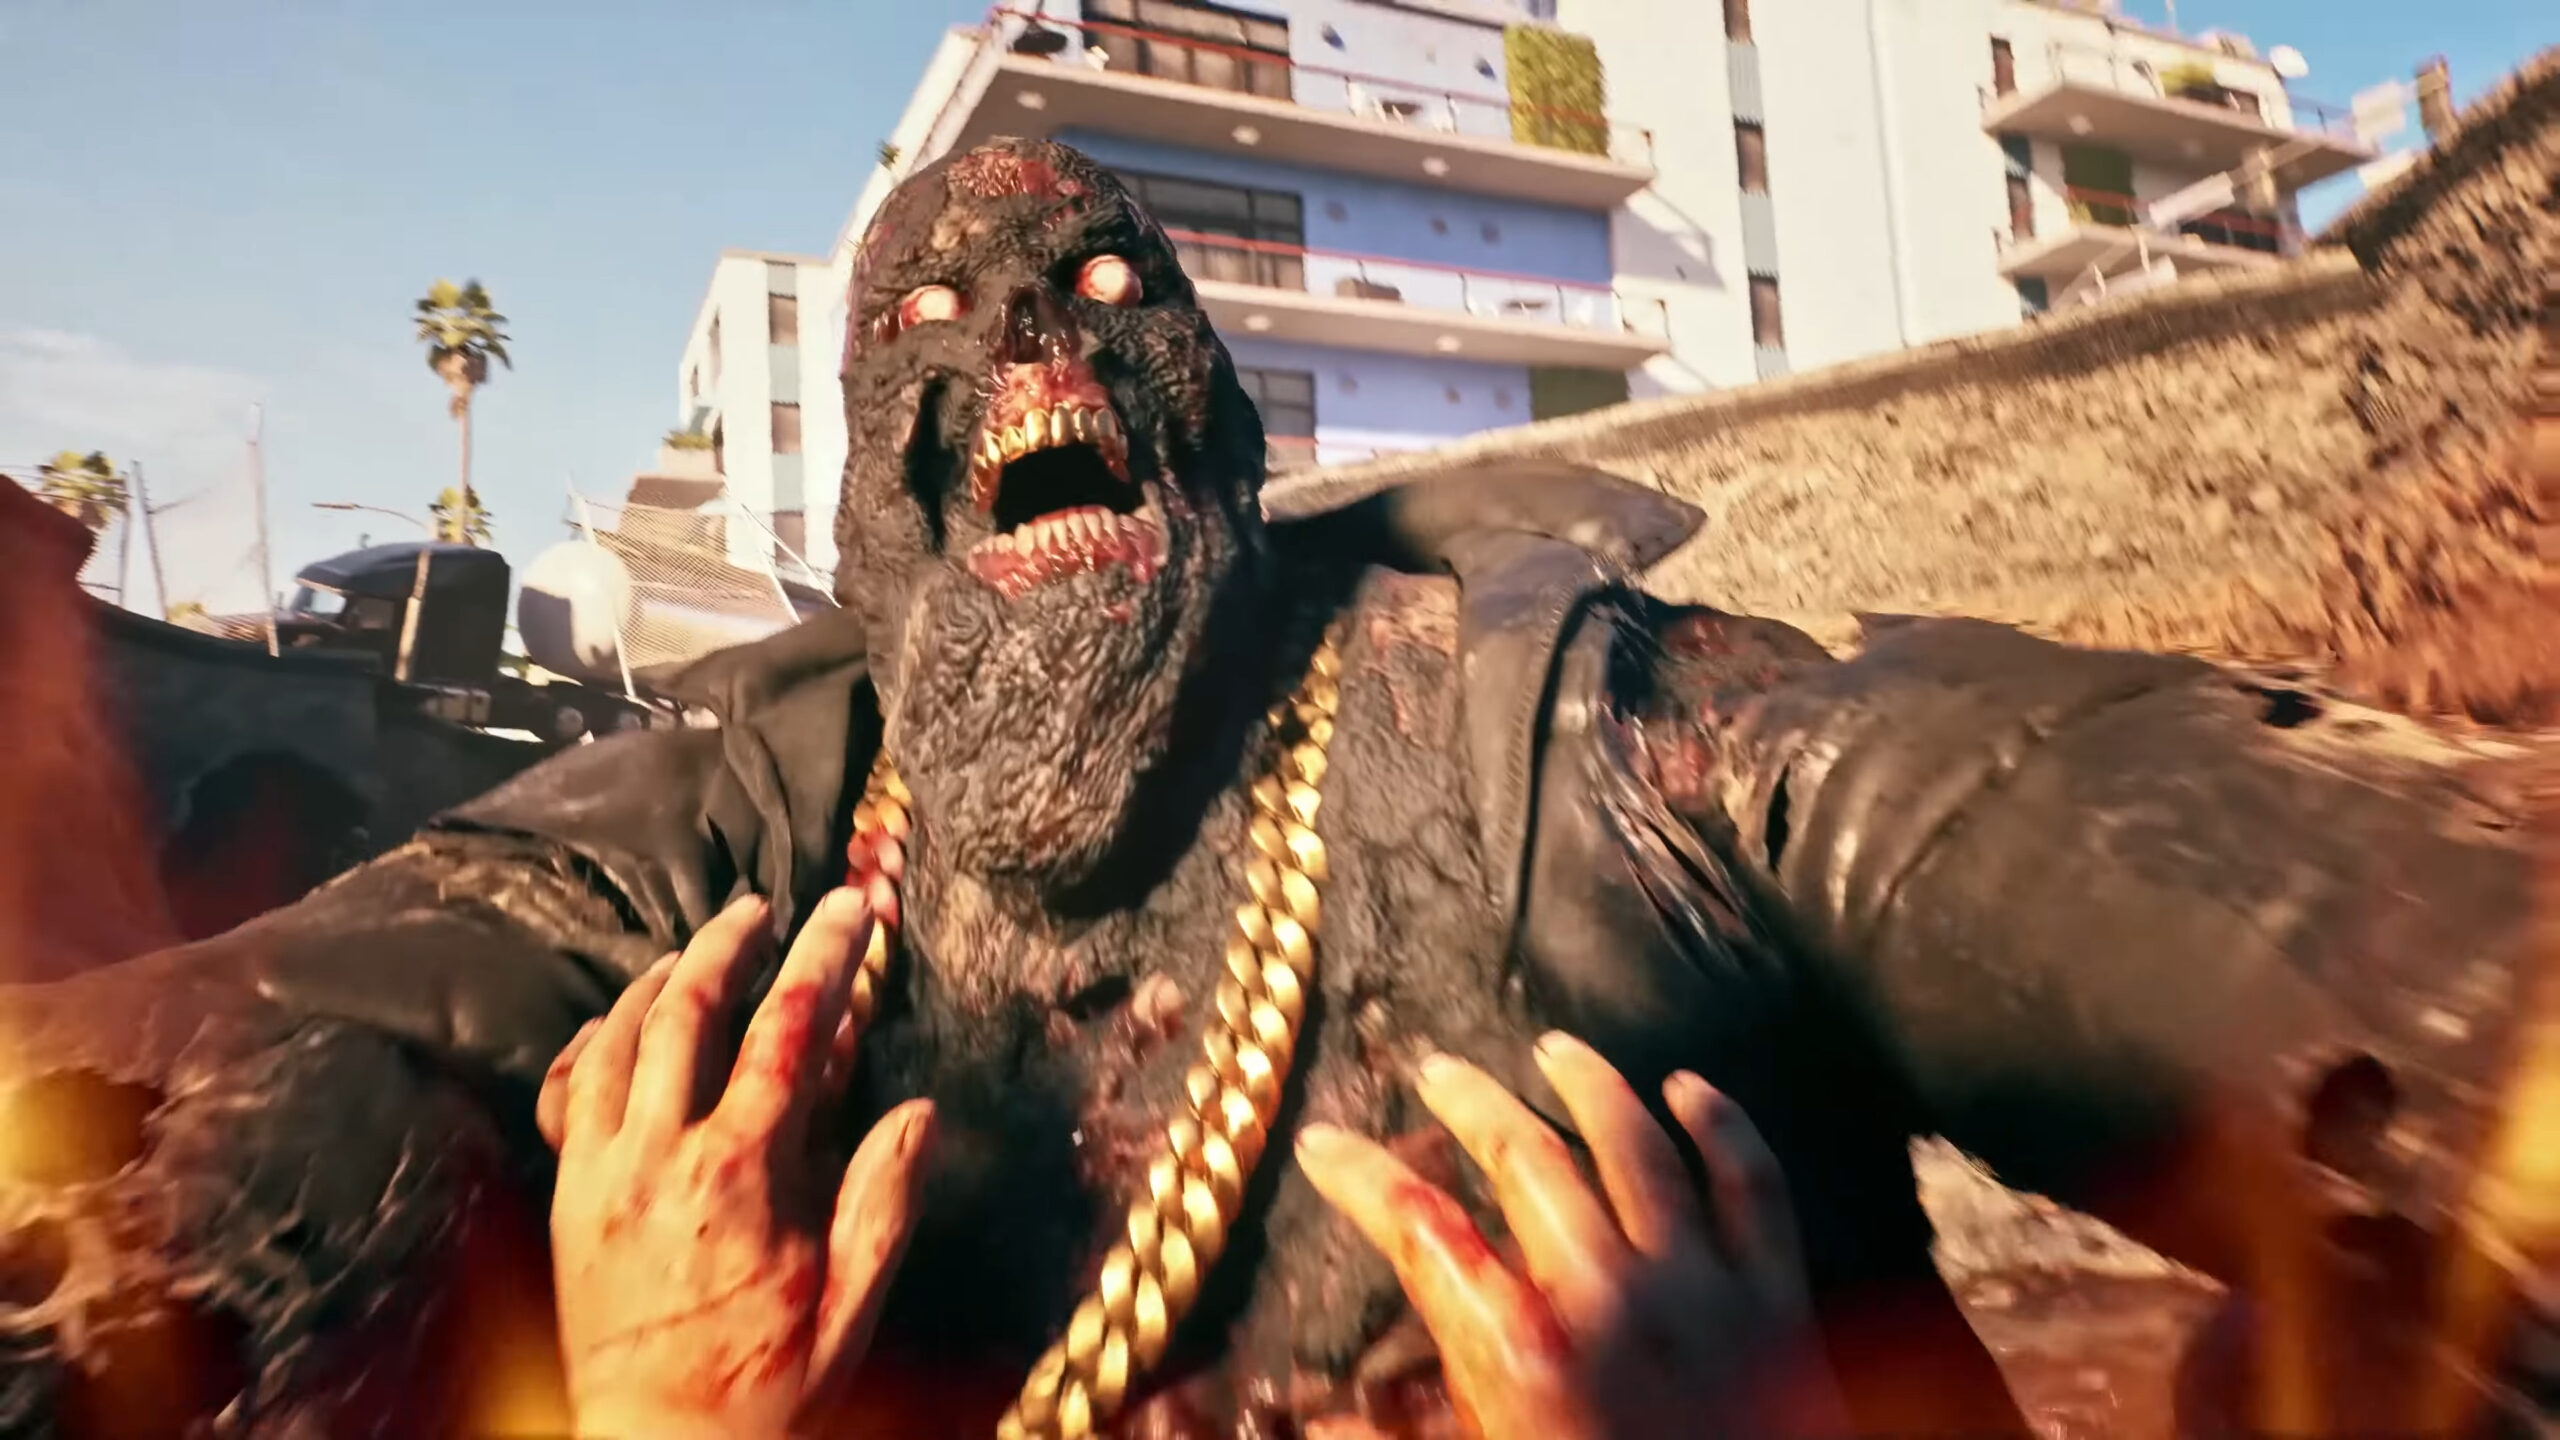 The virus comes for all, even rappers, in Dead Island 2 (2023), Dambuster Studios